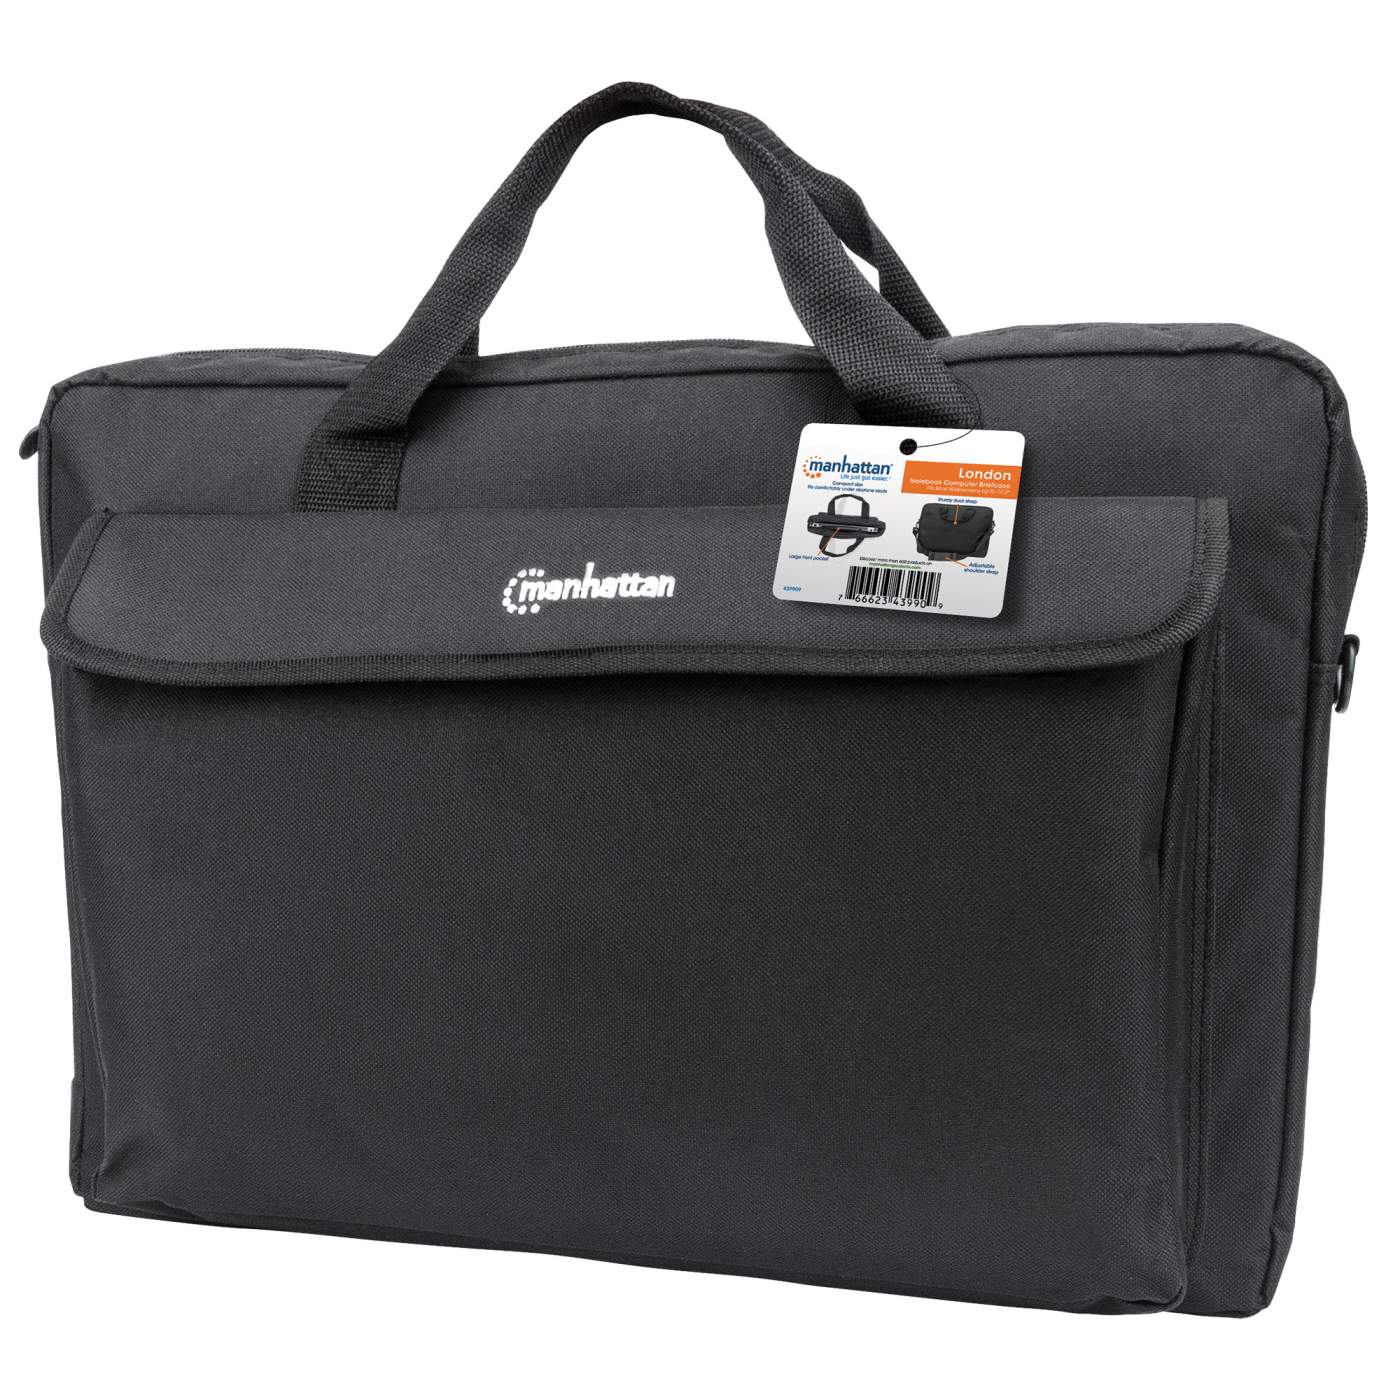 London Notebook Computer Briefcase 17.3" Packaging Image 2